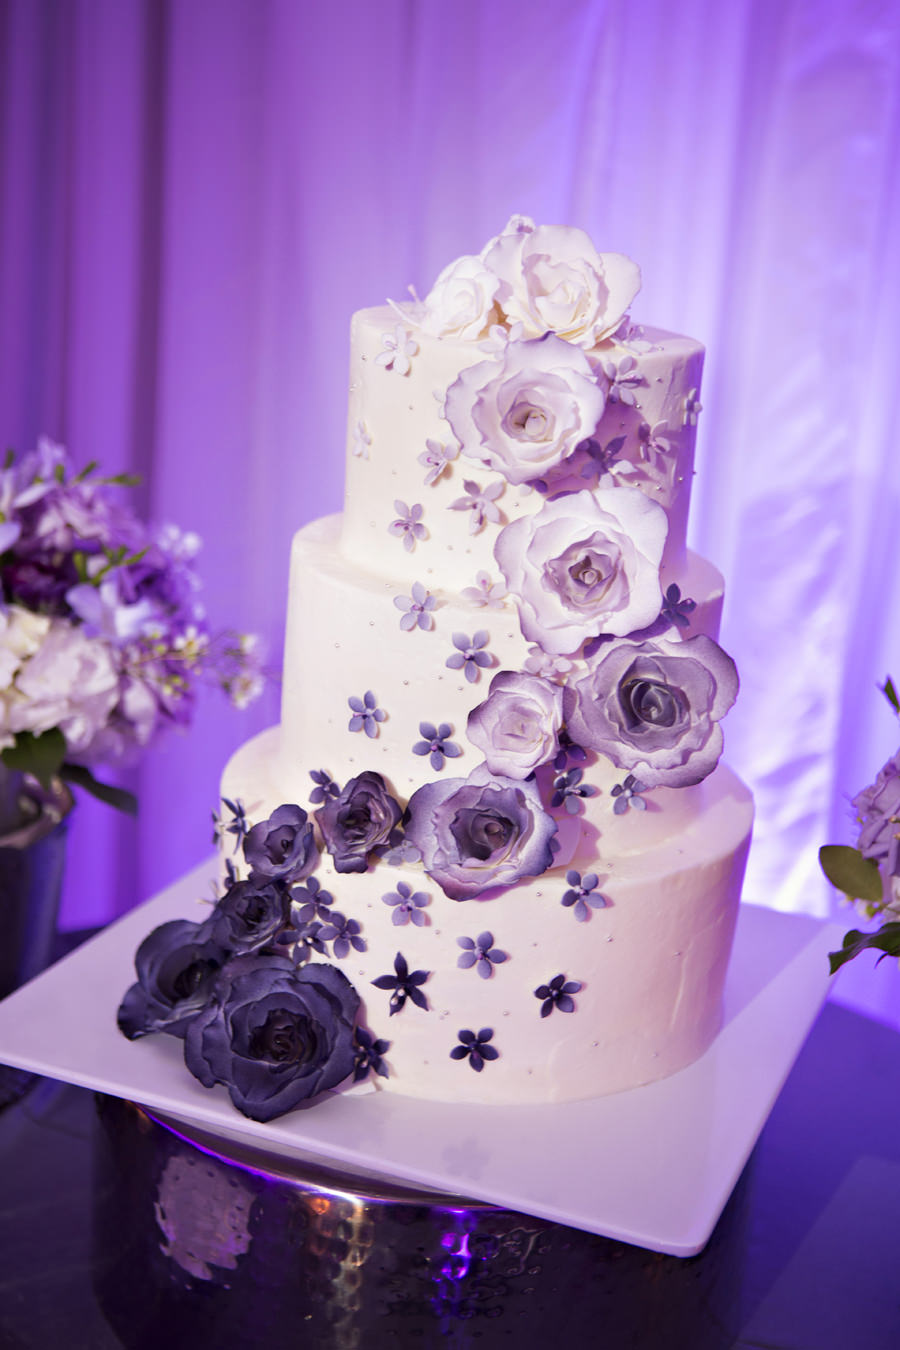 3-Tier White and Purple Round Wedding Cake with Cascading Sugar Flowers